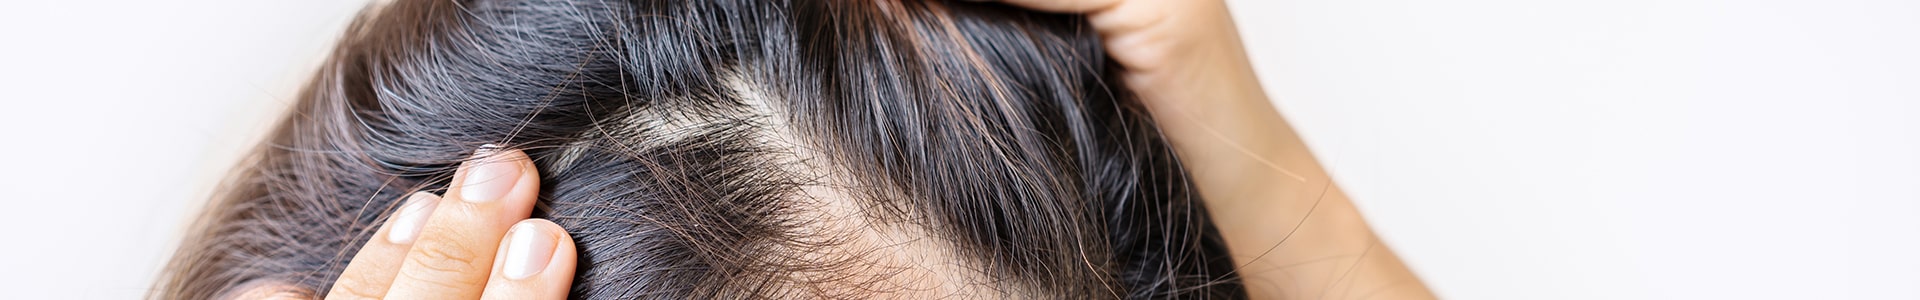 Find Personalized Hair Loss Treatments for Women from DCP